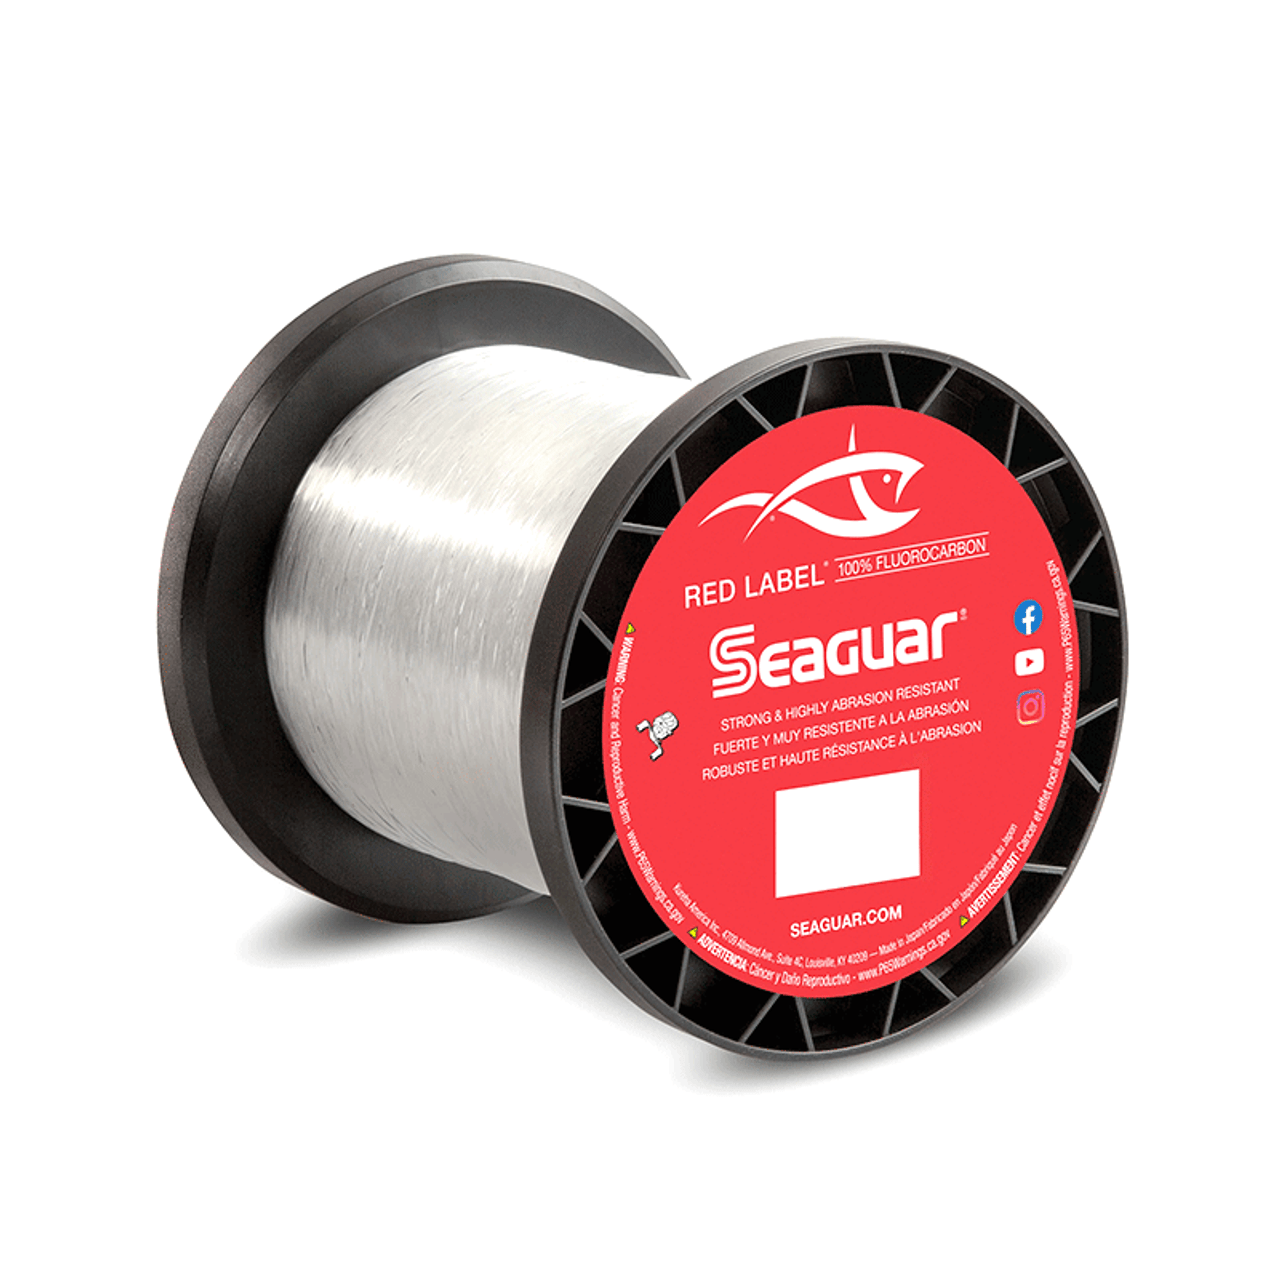 Red Label Clear 100% Fluorocarbon 1000 yd Spool by Seaguar